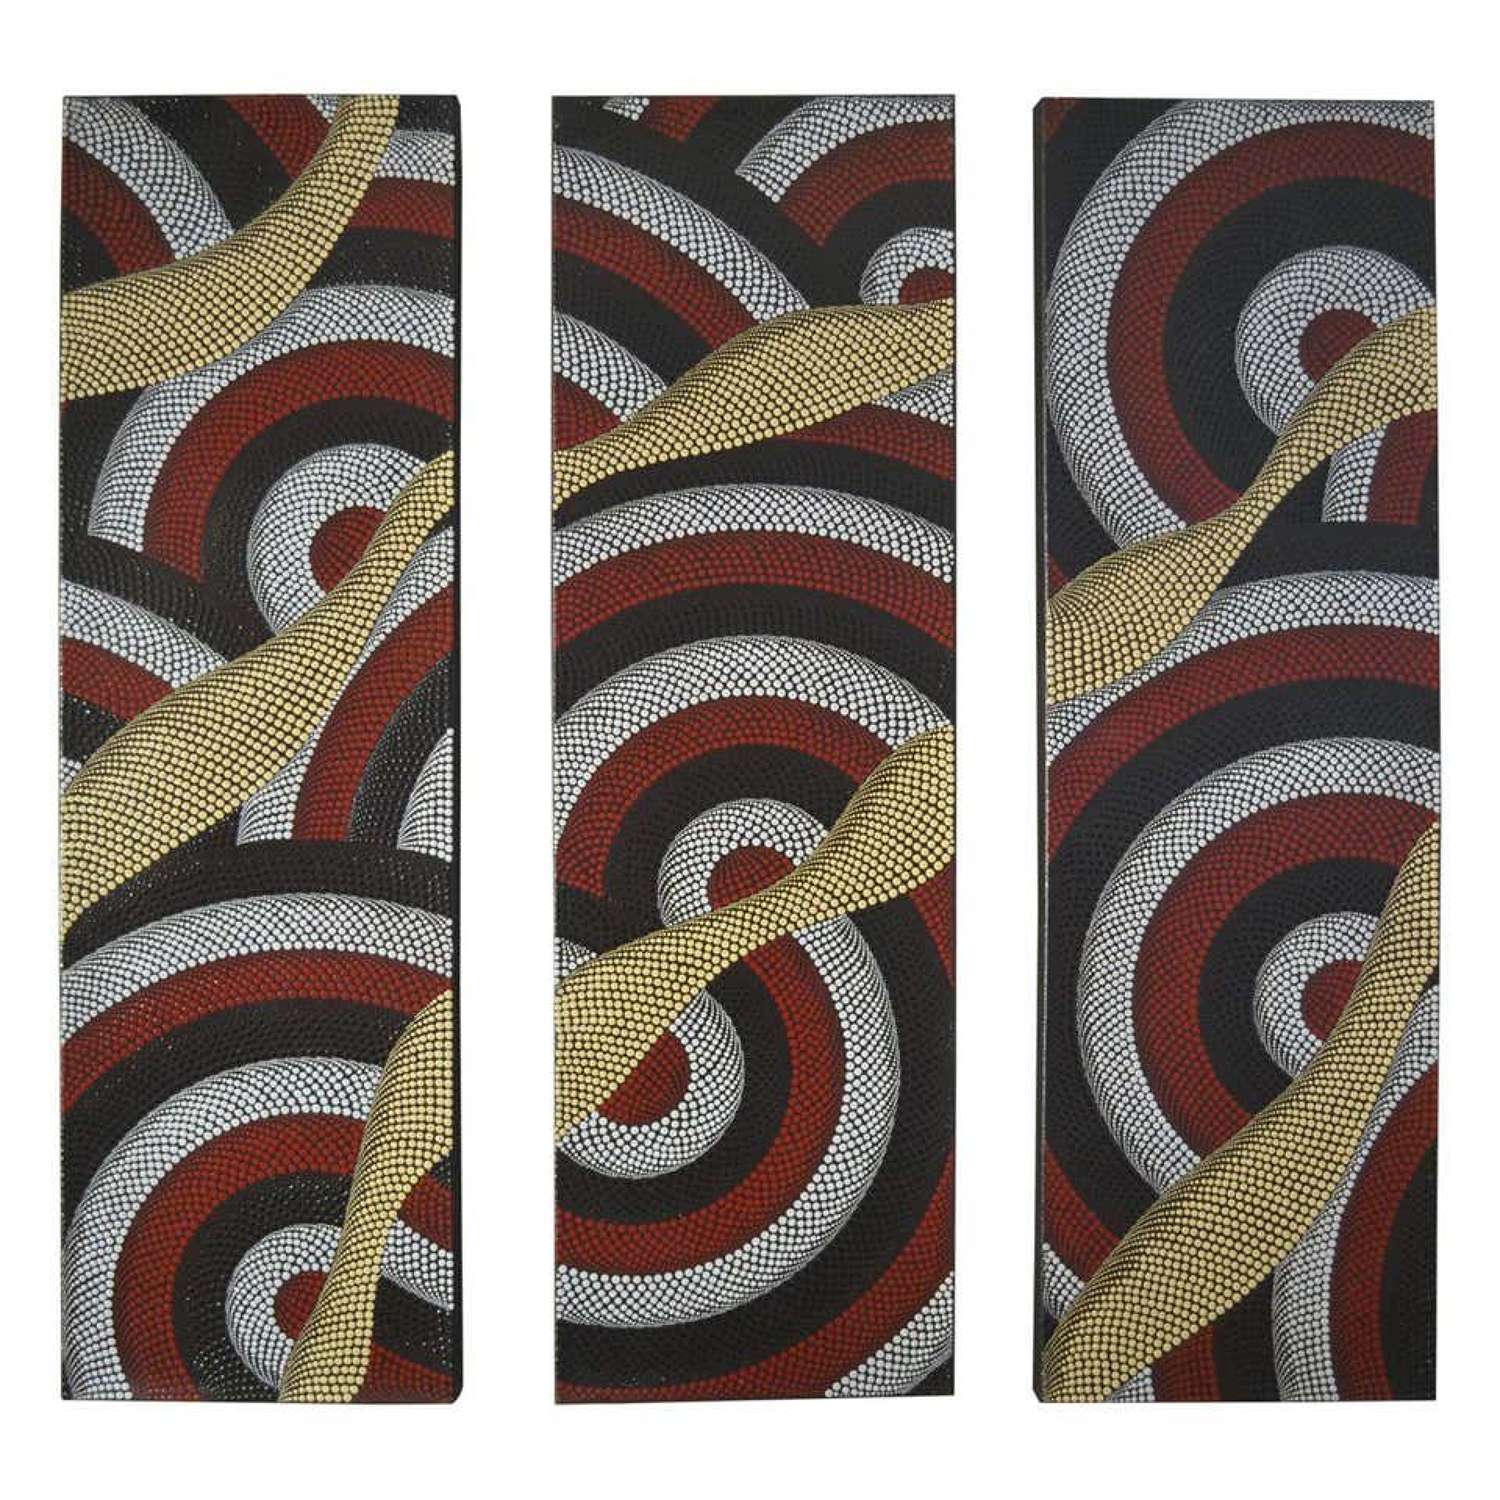 Triptych of Contemporary Aboriginal Dot Paintings